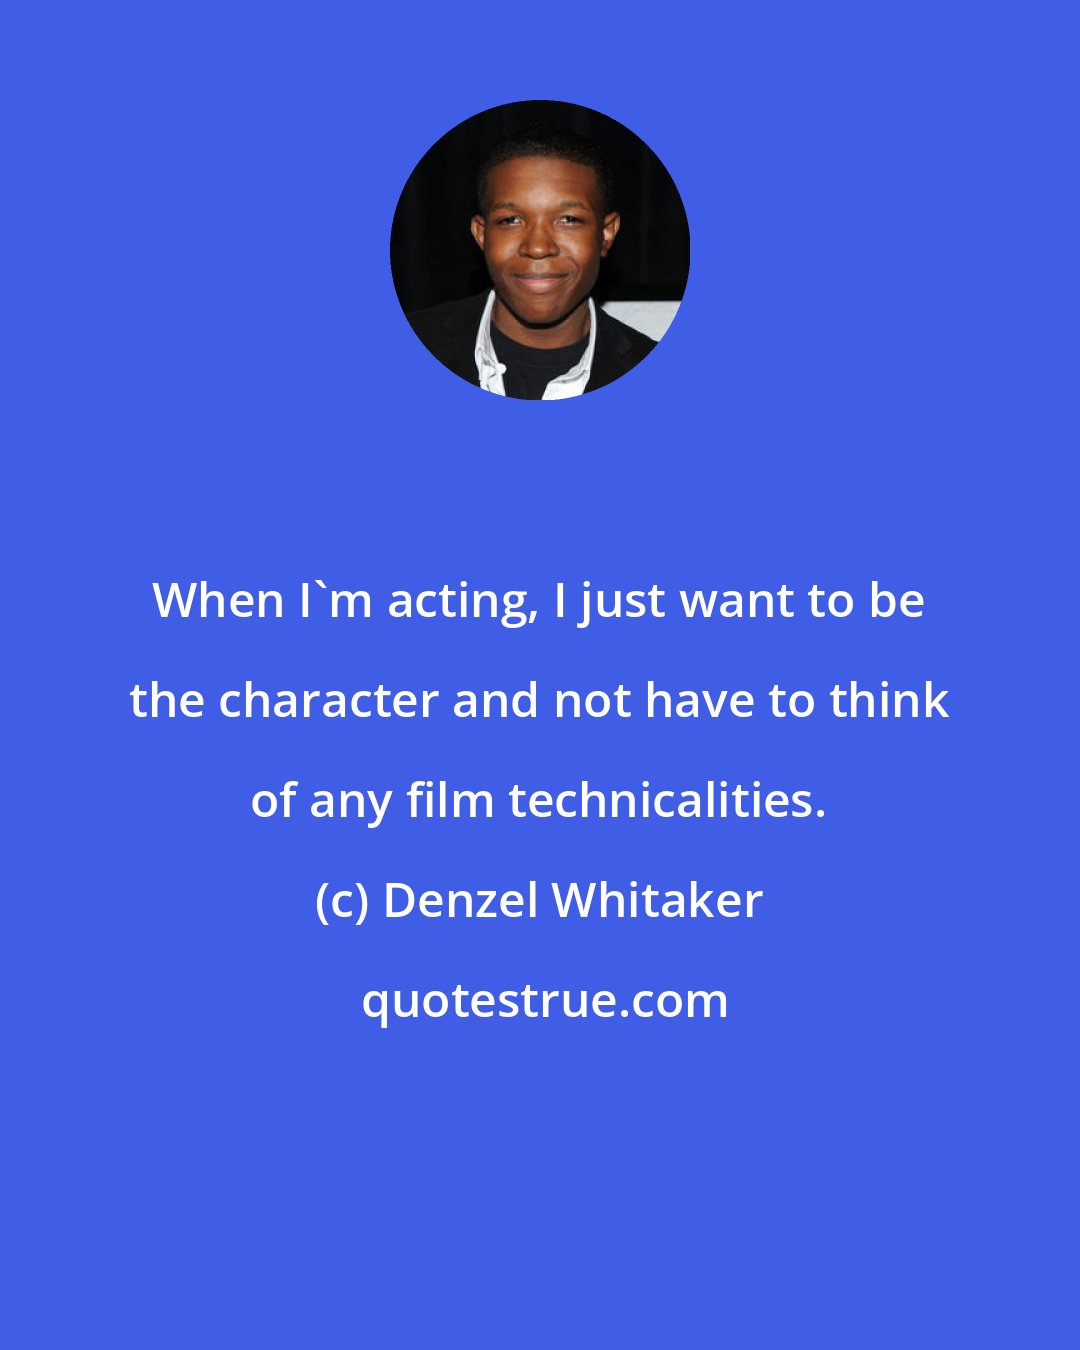 Denzel Whitaker: When I'm acting, I just want to be the character and not have to think of any film technicalities.